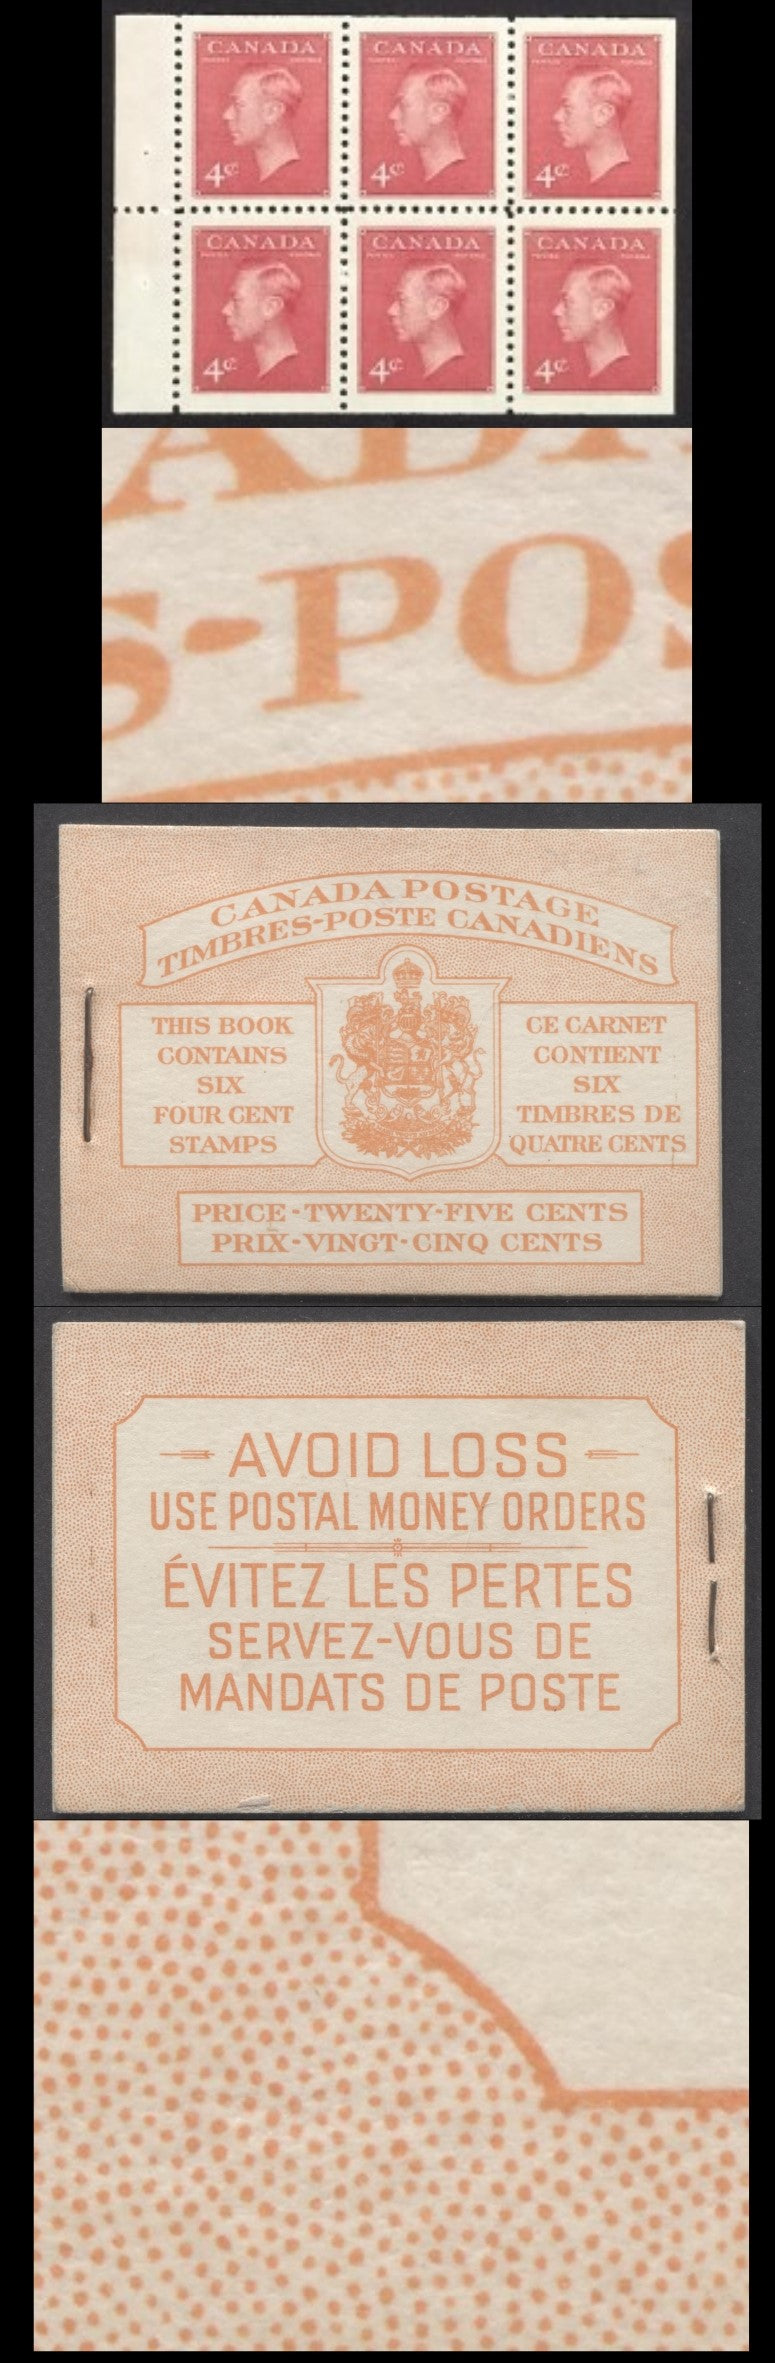 Lot 95 Canada #BK41bB 1949-1951 KGVI Issue, A Complete 25c Bilingual Booklet With 4c Dark Carmine, Pane Of 6. Front Cover IIIe, Back Cover Gii, Type II Cover, No Rate Page, 1,203,000 Issued